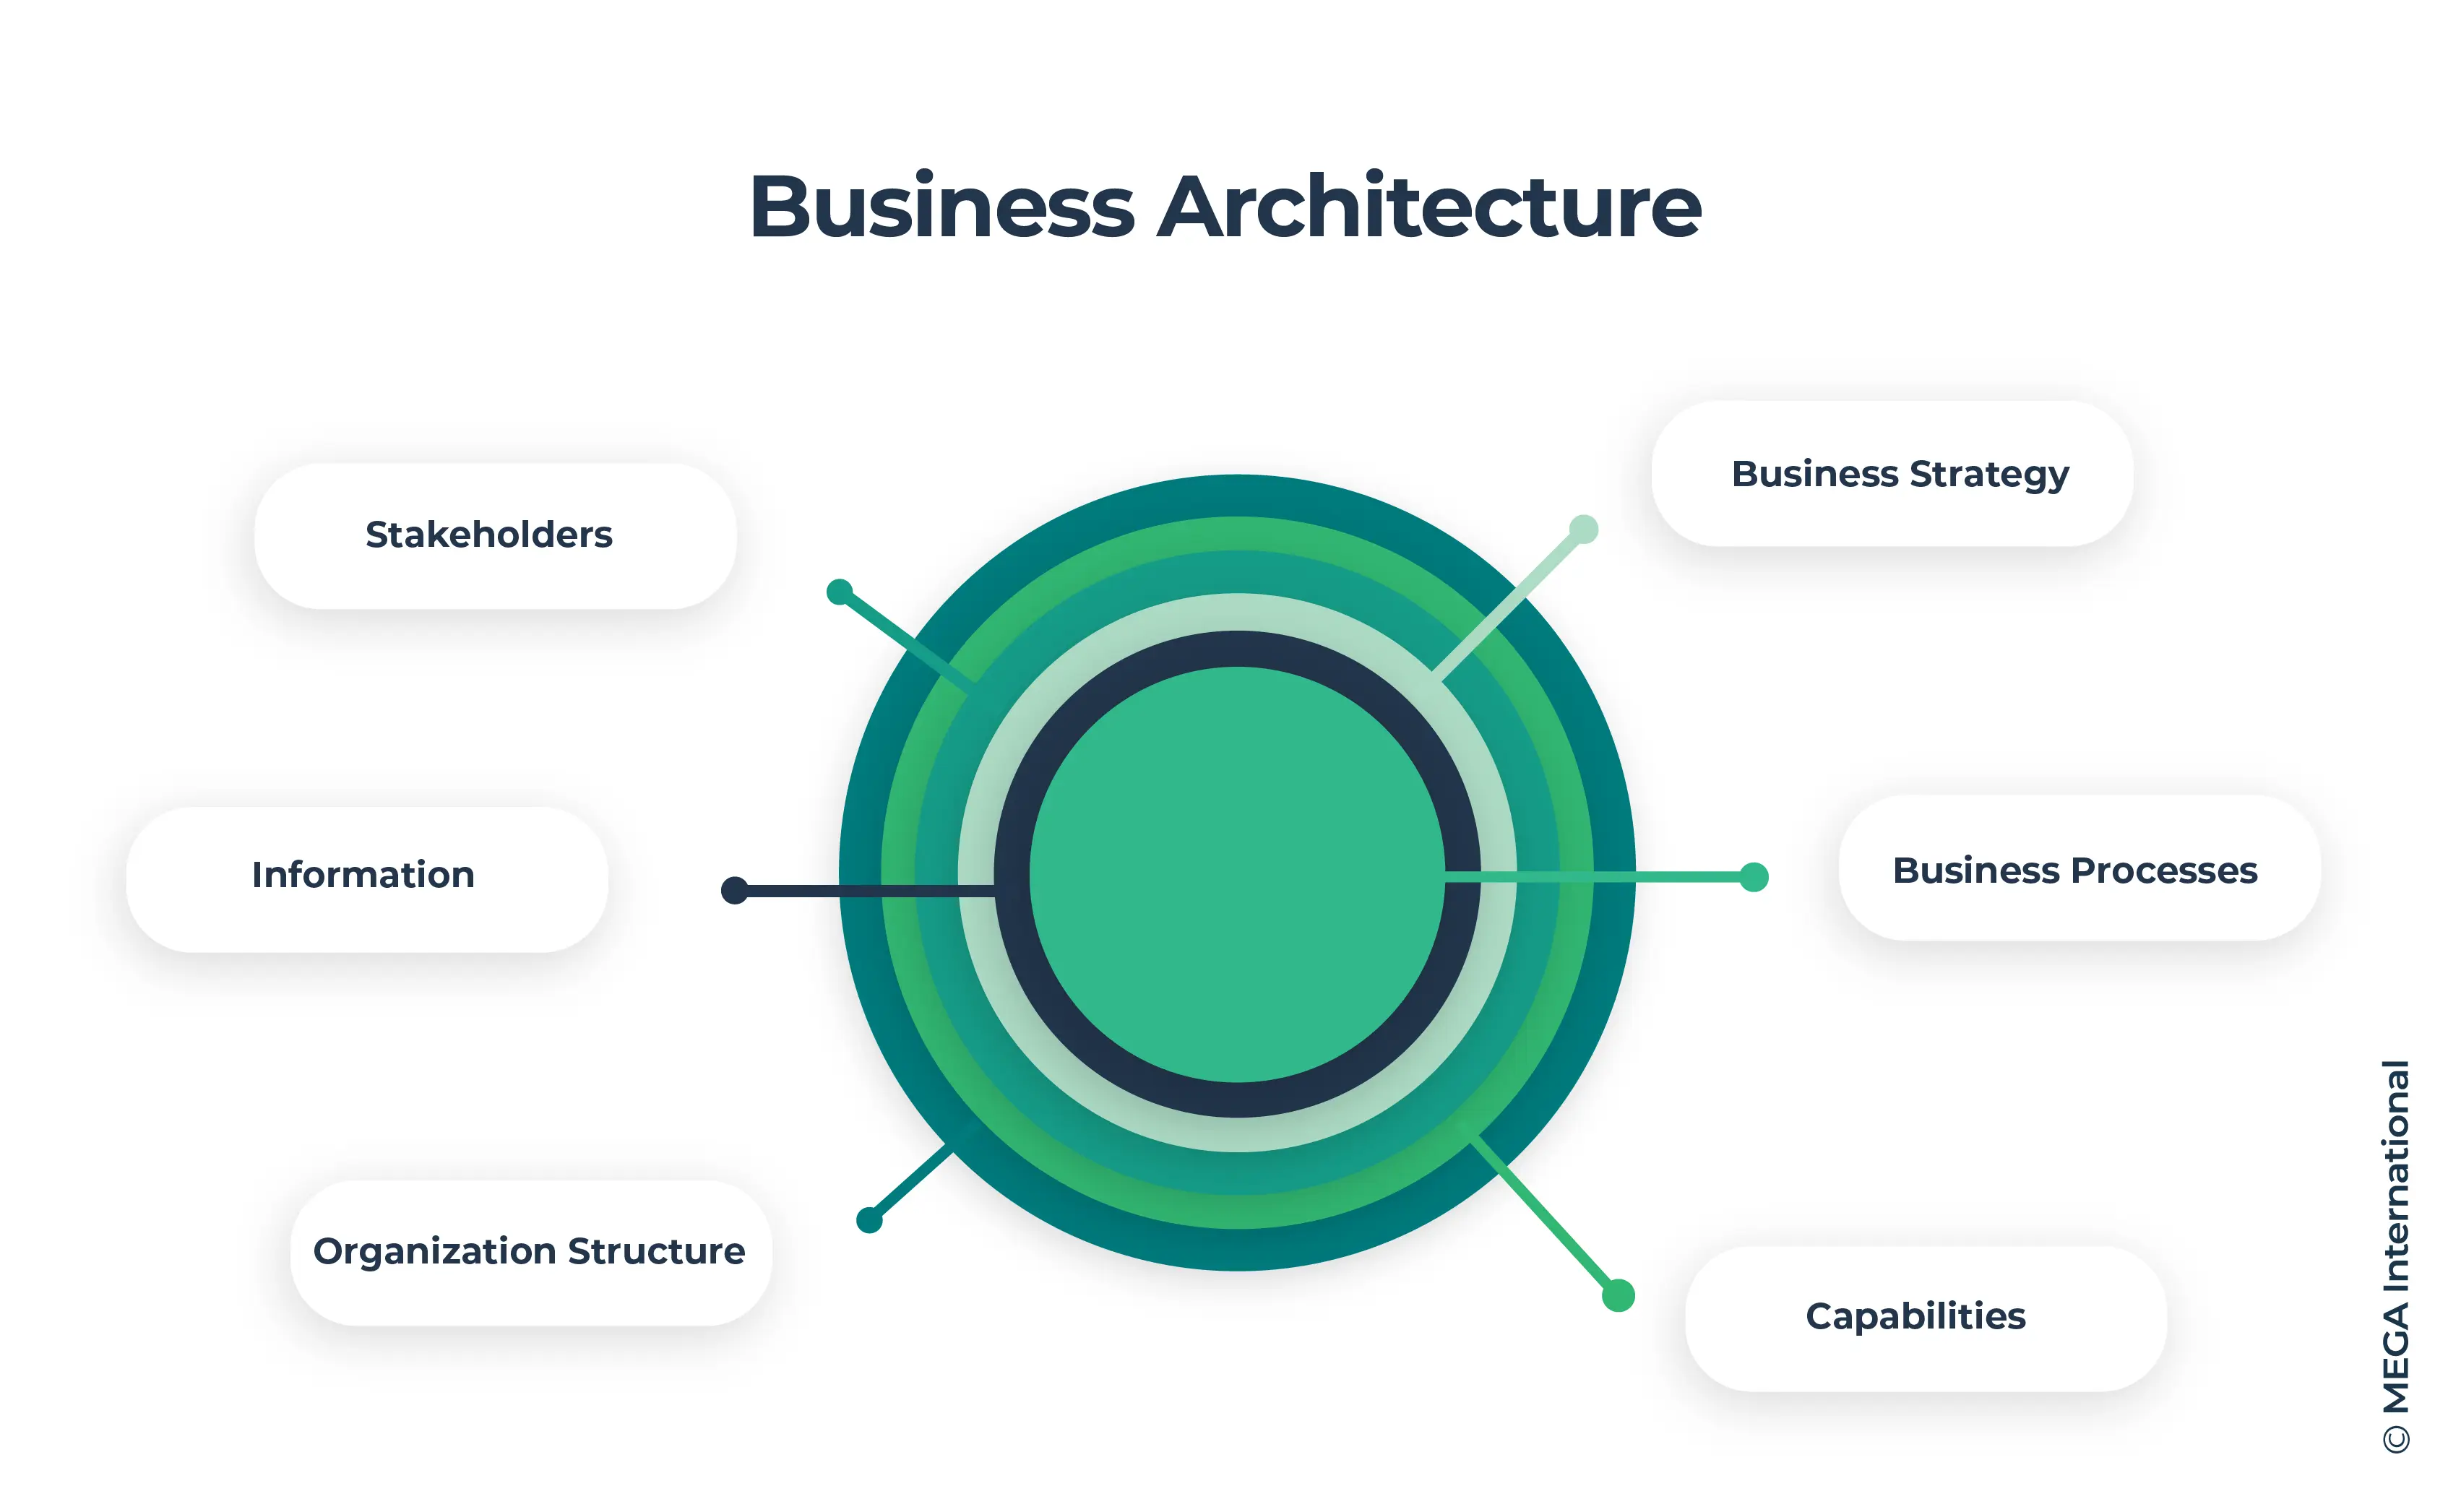 Key Components of Business Architecture